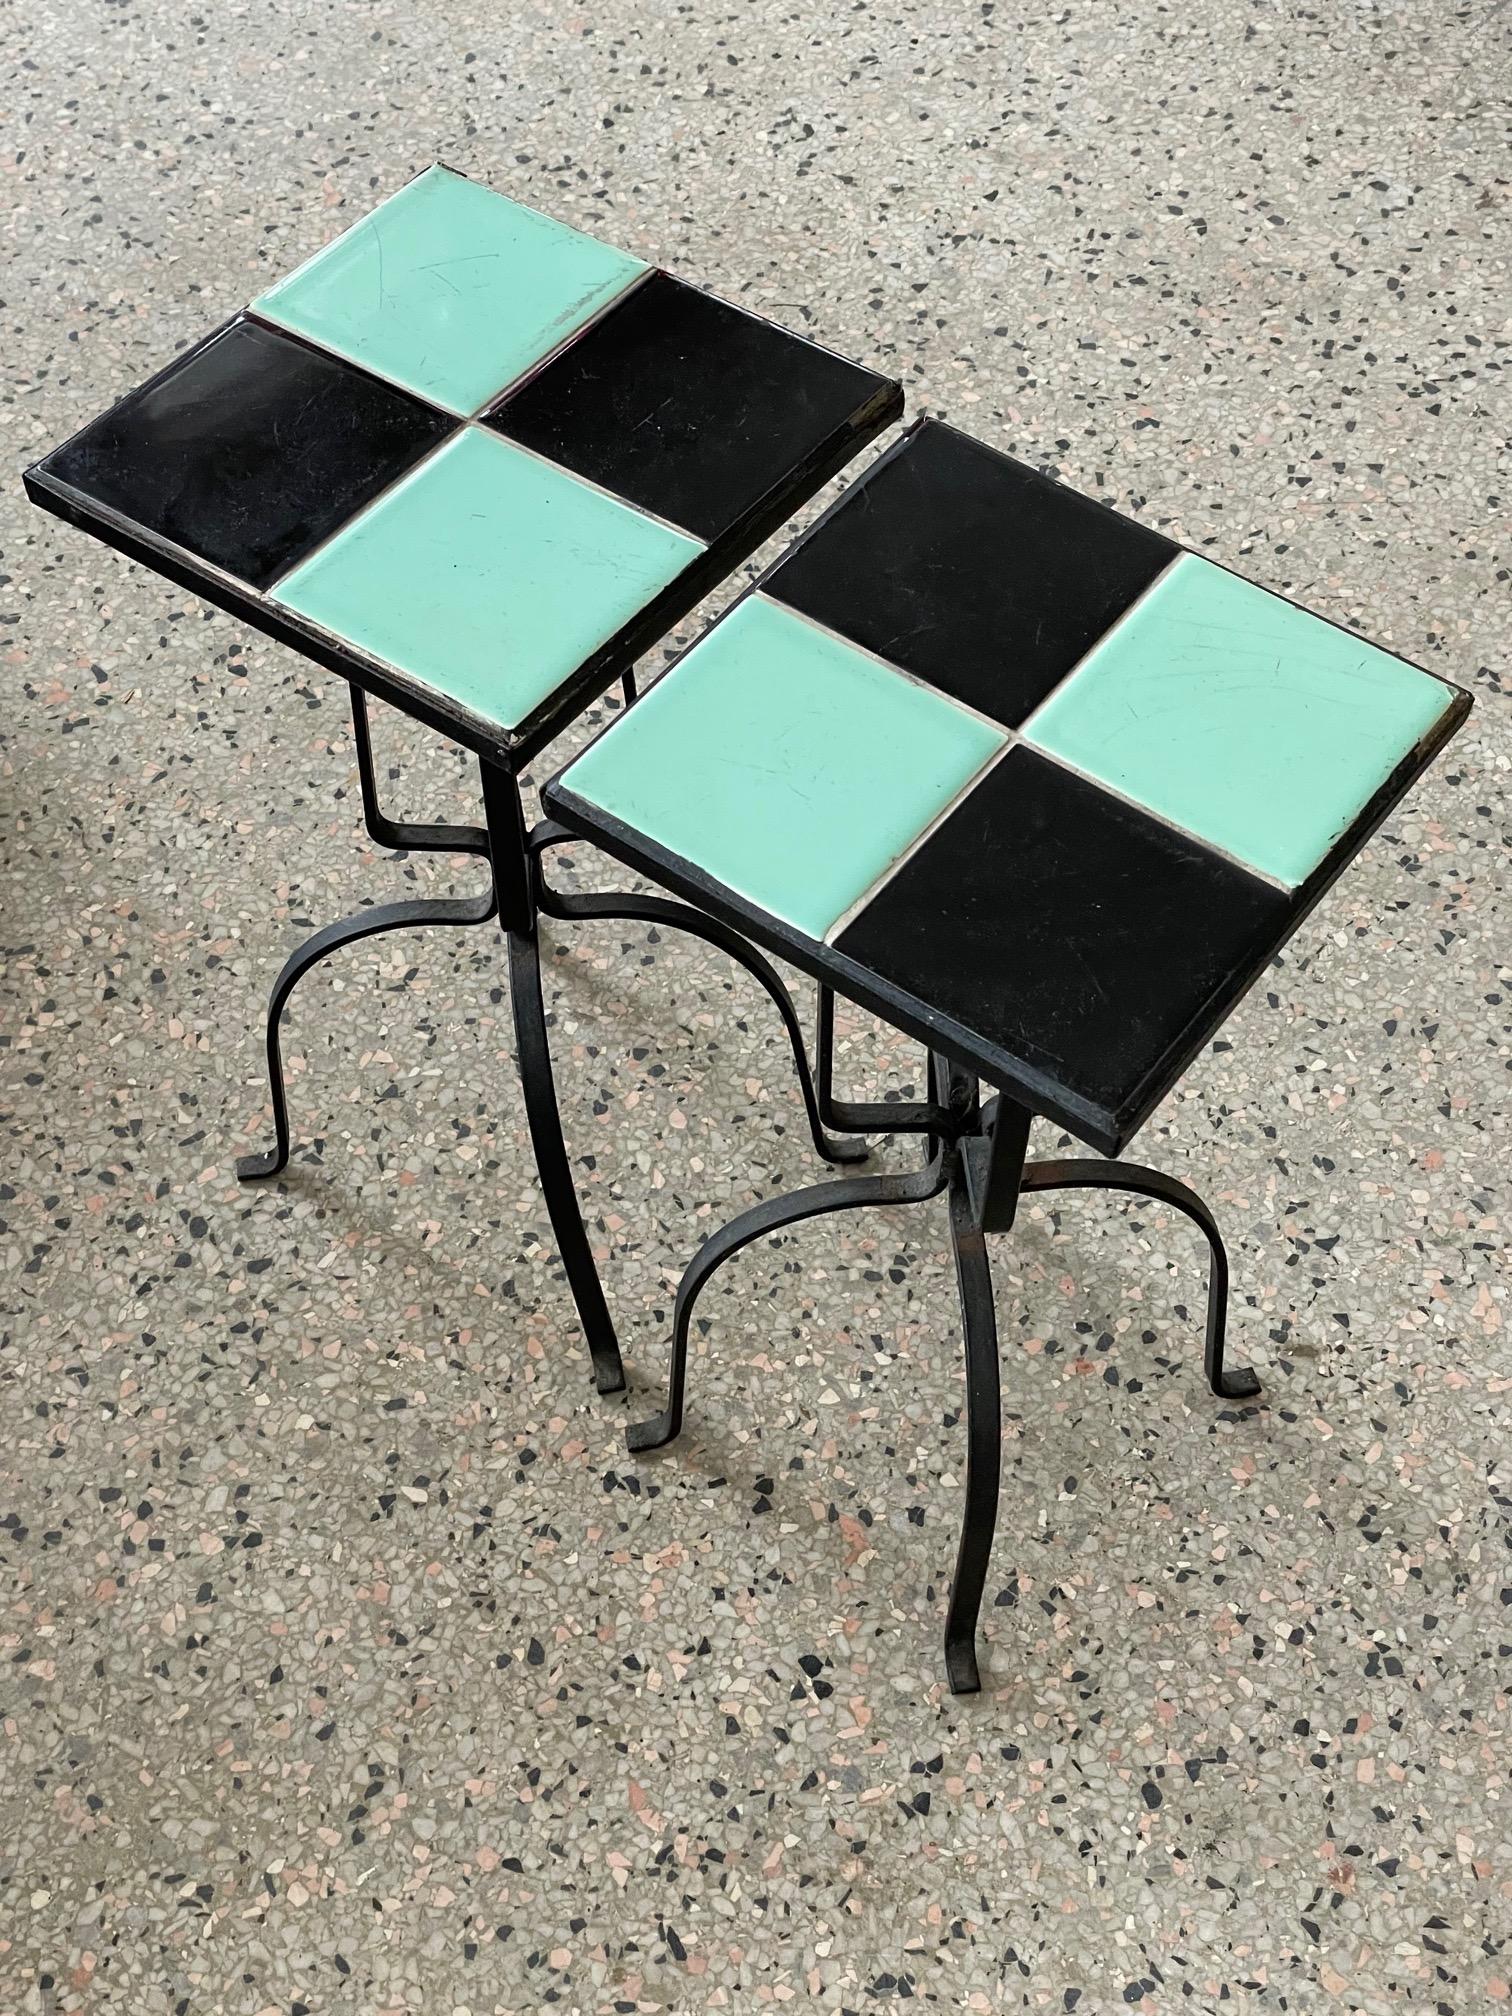 A pair of wrought iron and tile top tables. The tiles are black and blue/green. The tables are 18